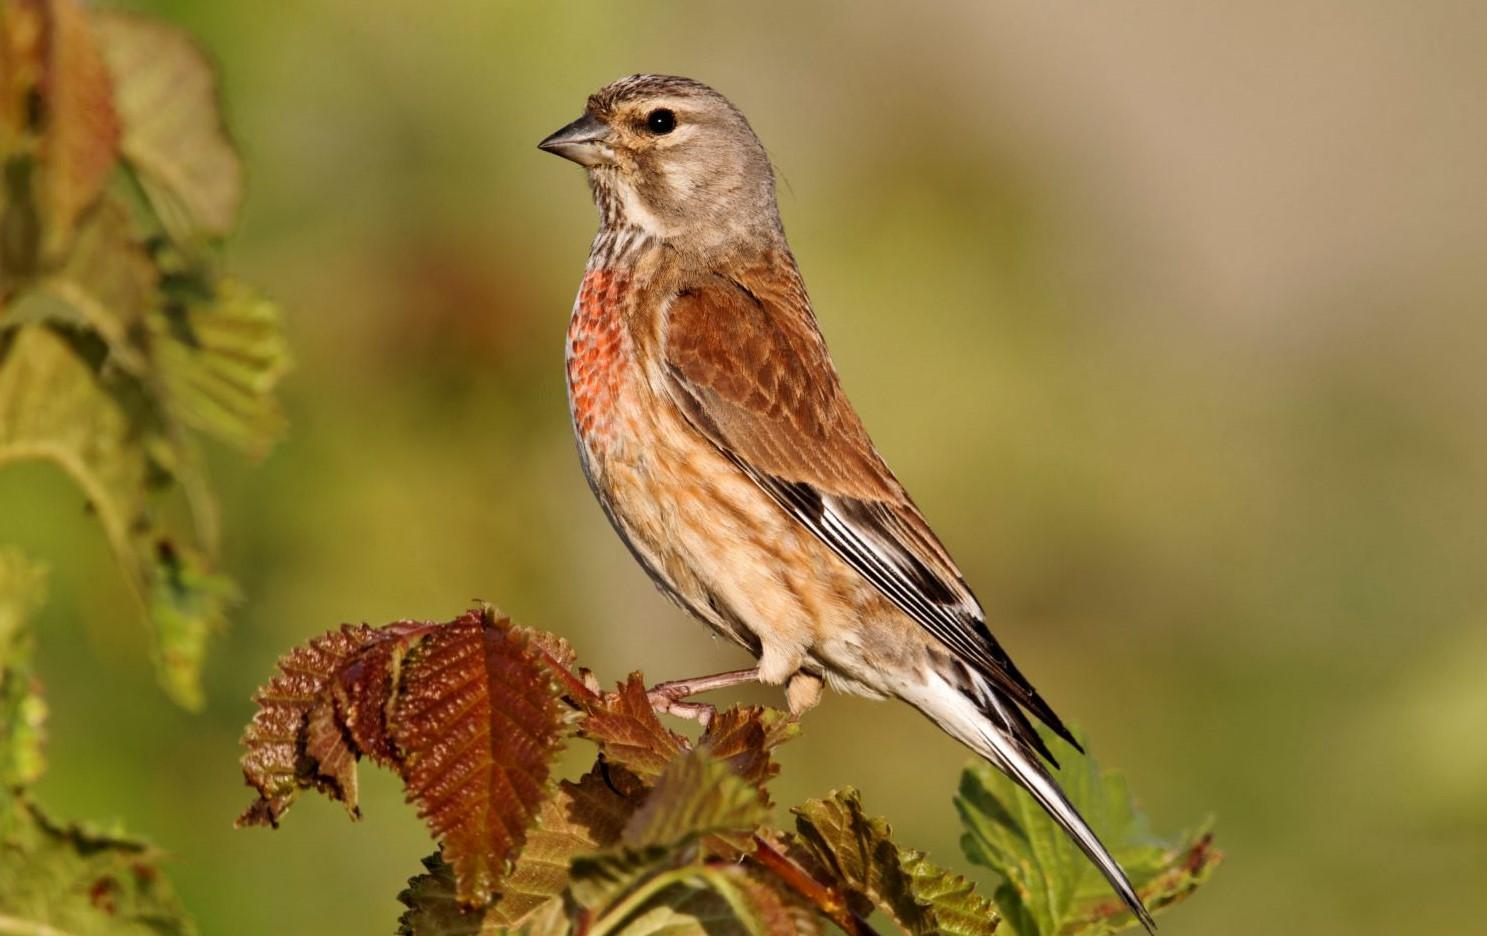 A Linnet perched on a tree branch